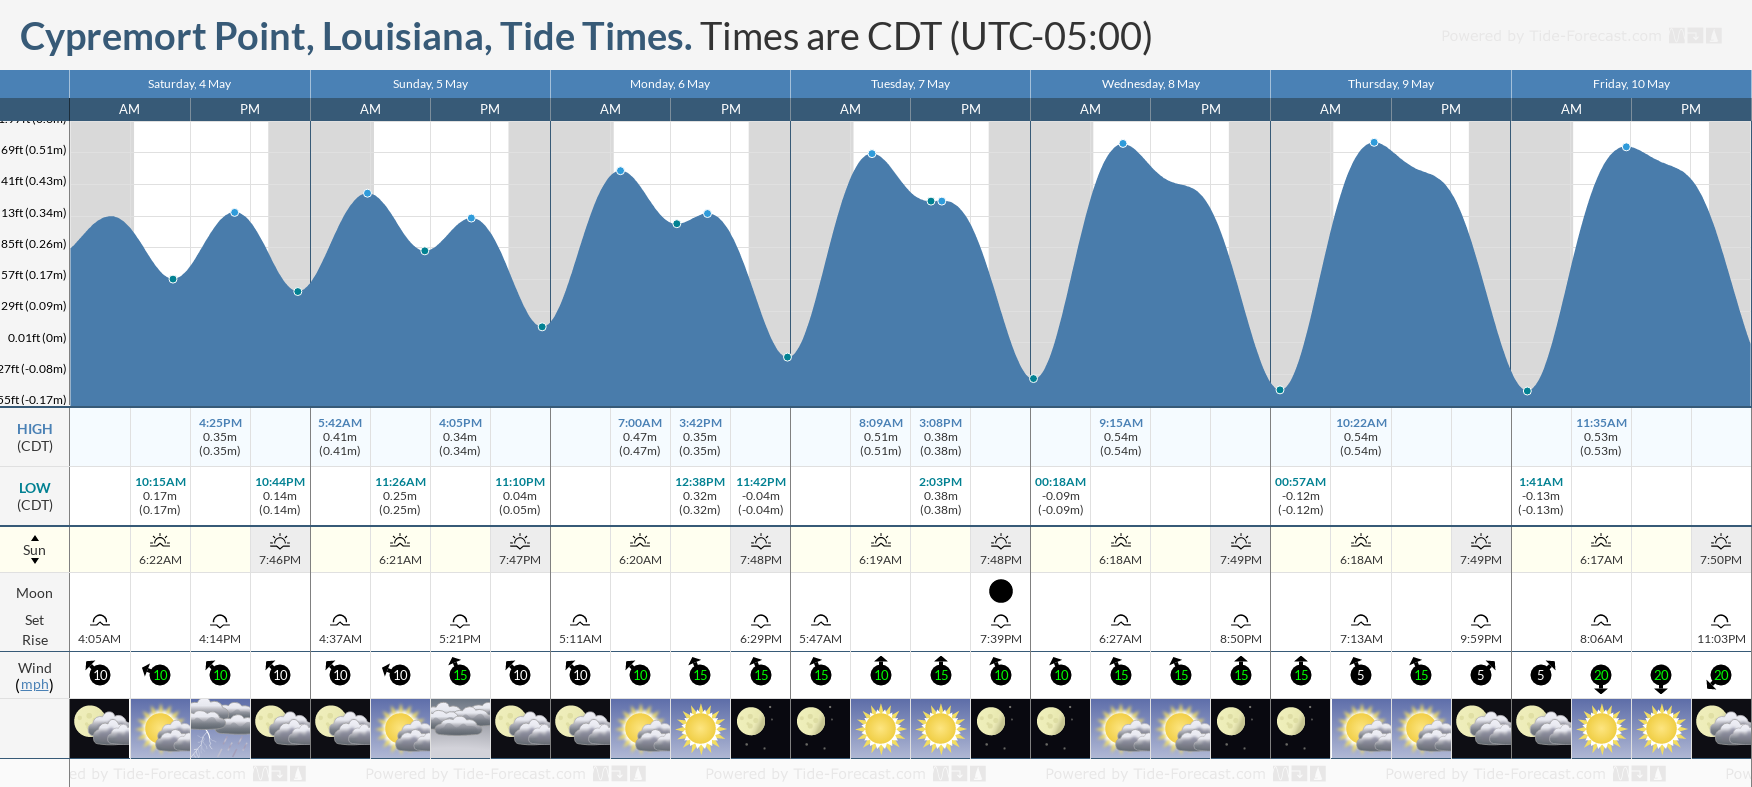 Cypremort Point, Louisiana Tide Chart including high and low tide tide times for the next 7 days